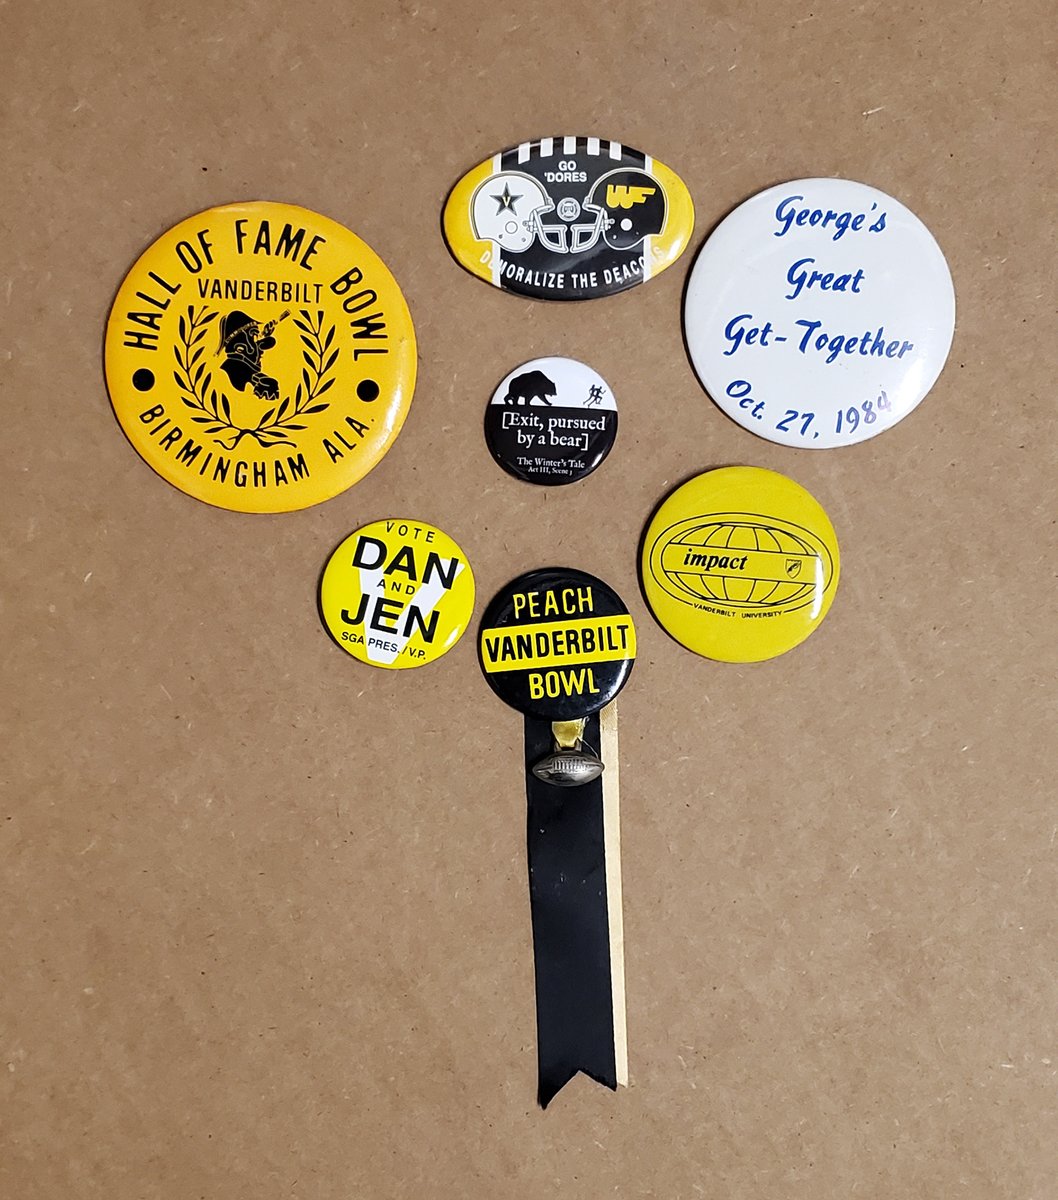 For decades, Vanderbilt community members have sported buttons and pins to proudly express themselves. Here are a few of our favorites from Special Collections and University Archives. #VU150 #VandyGram